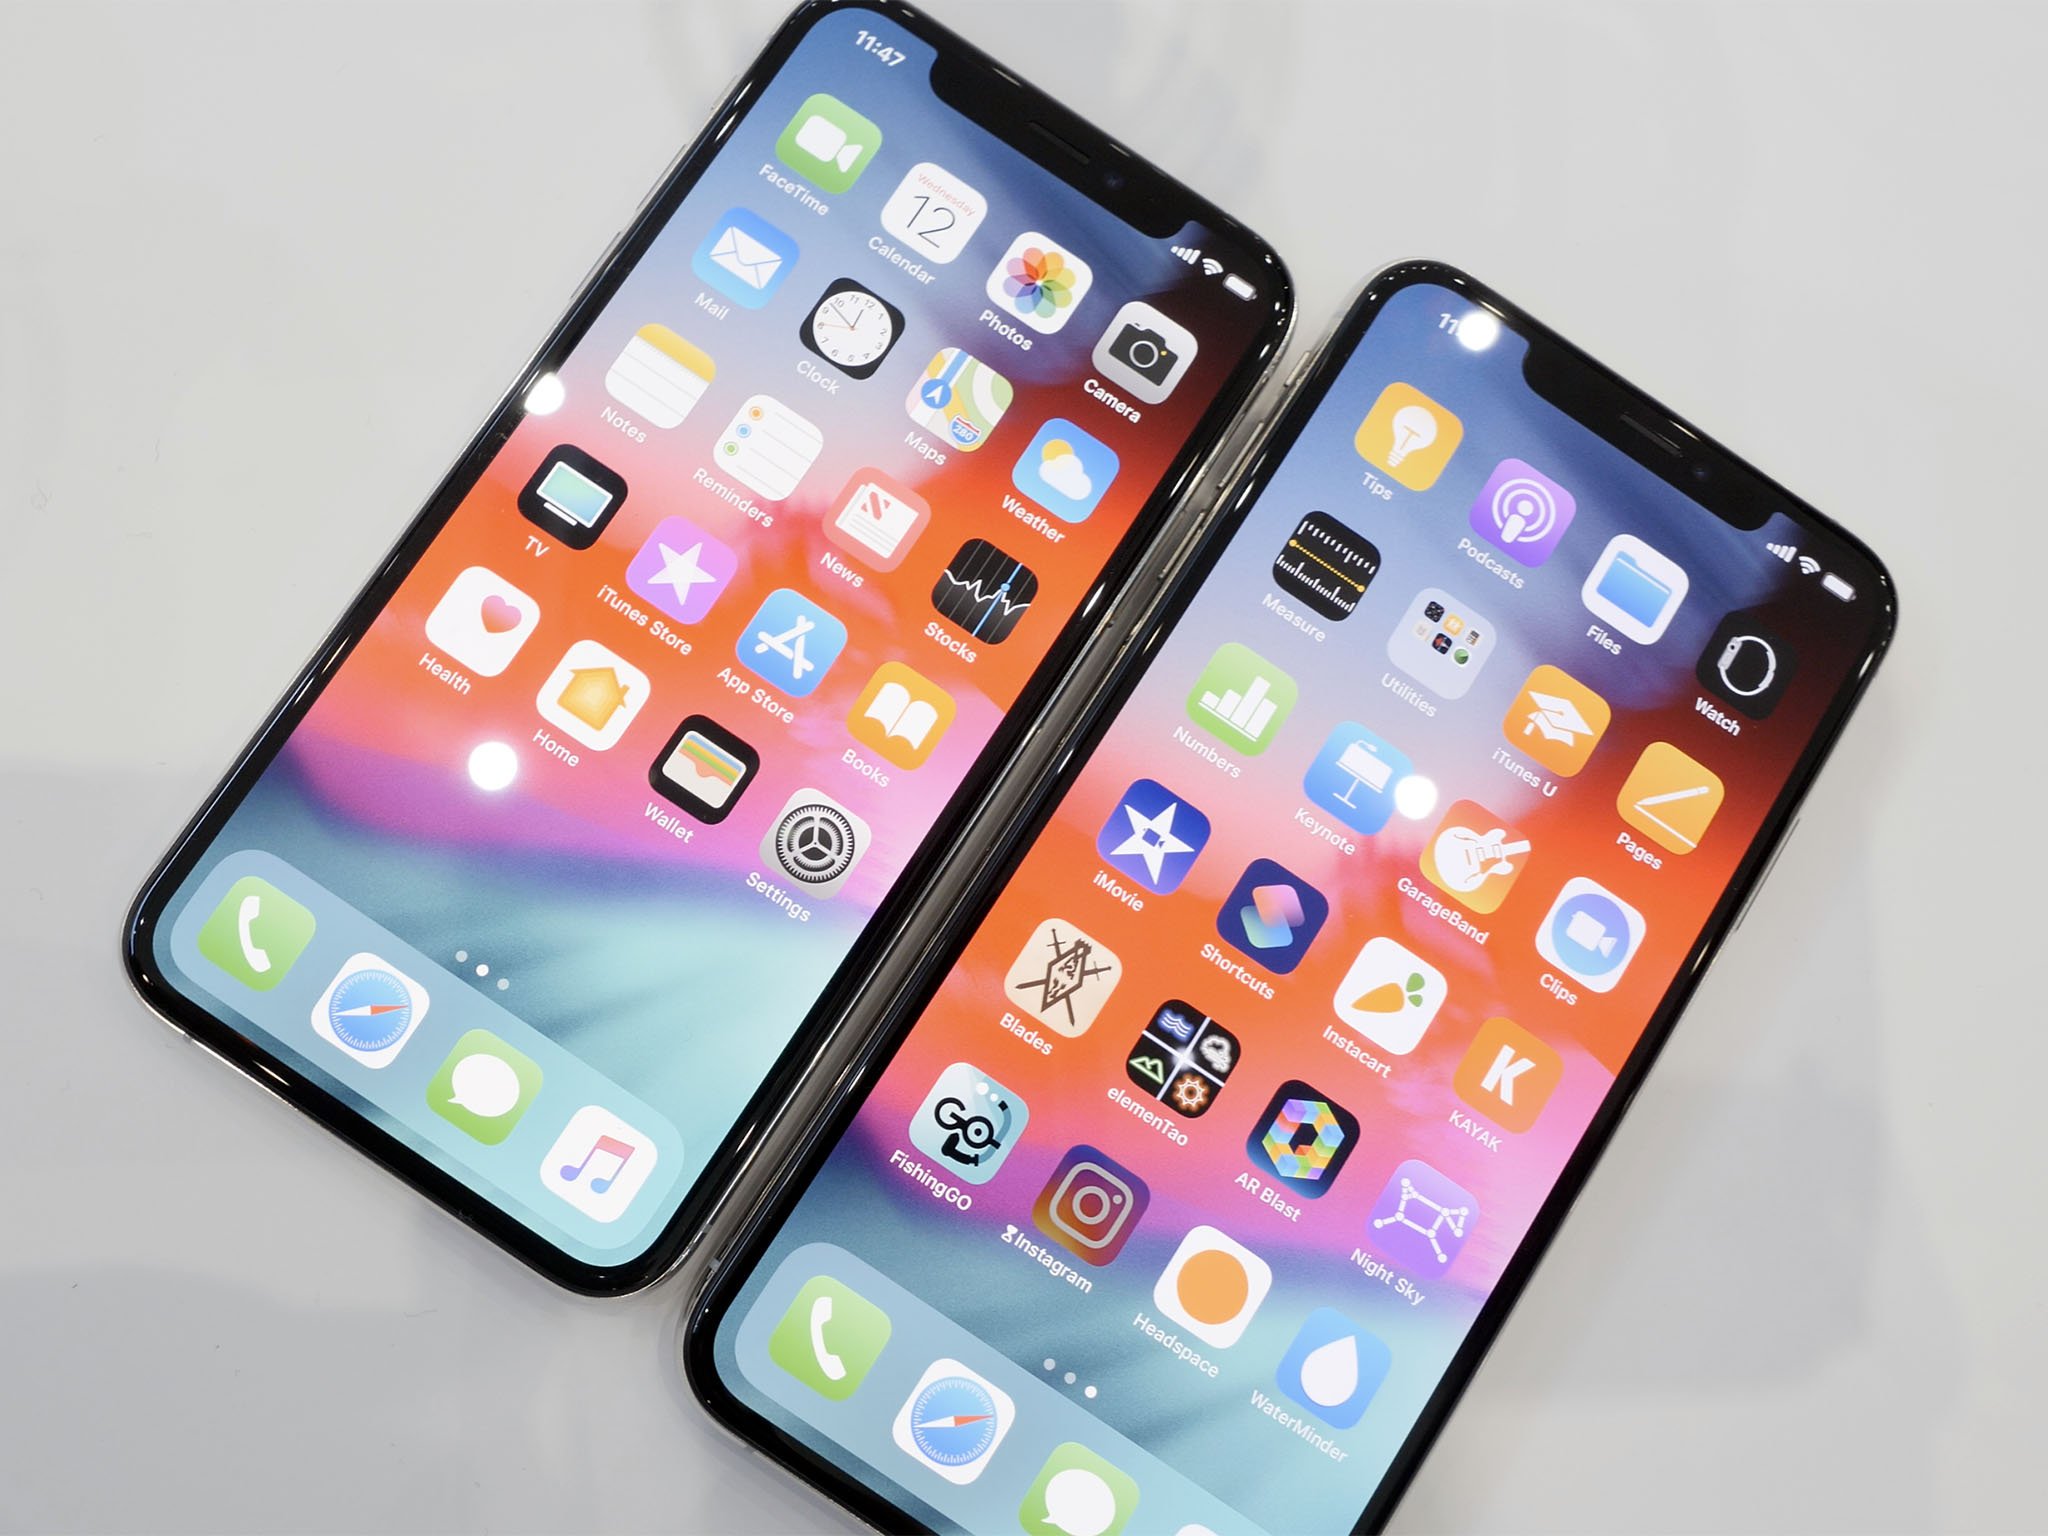 iPhone Xs + Max storage size: Should you get 64GB, 256GB, or 512GB?